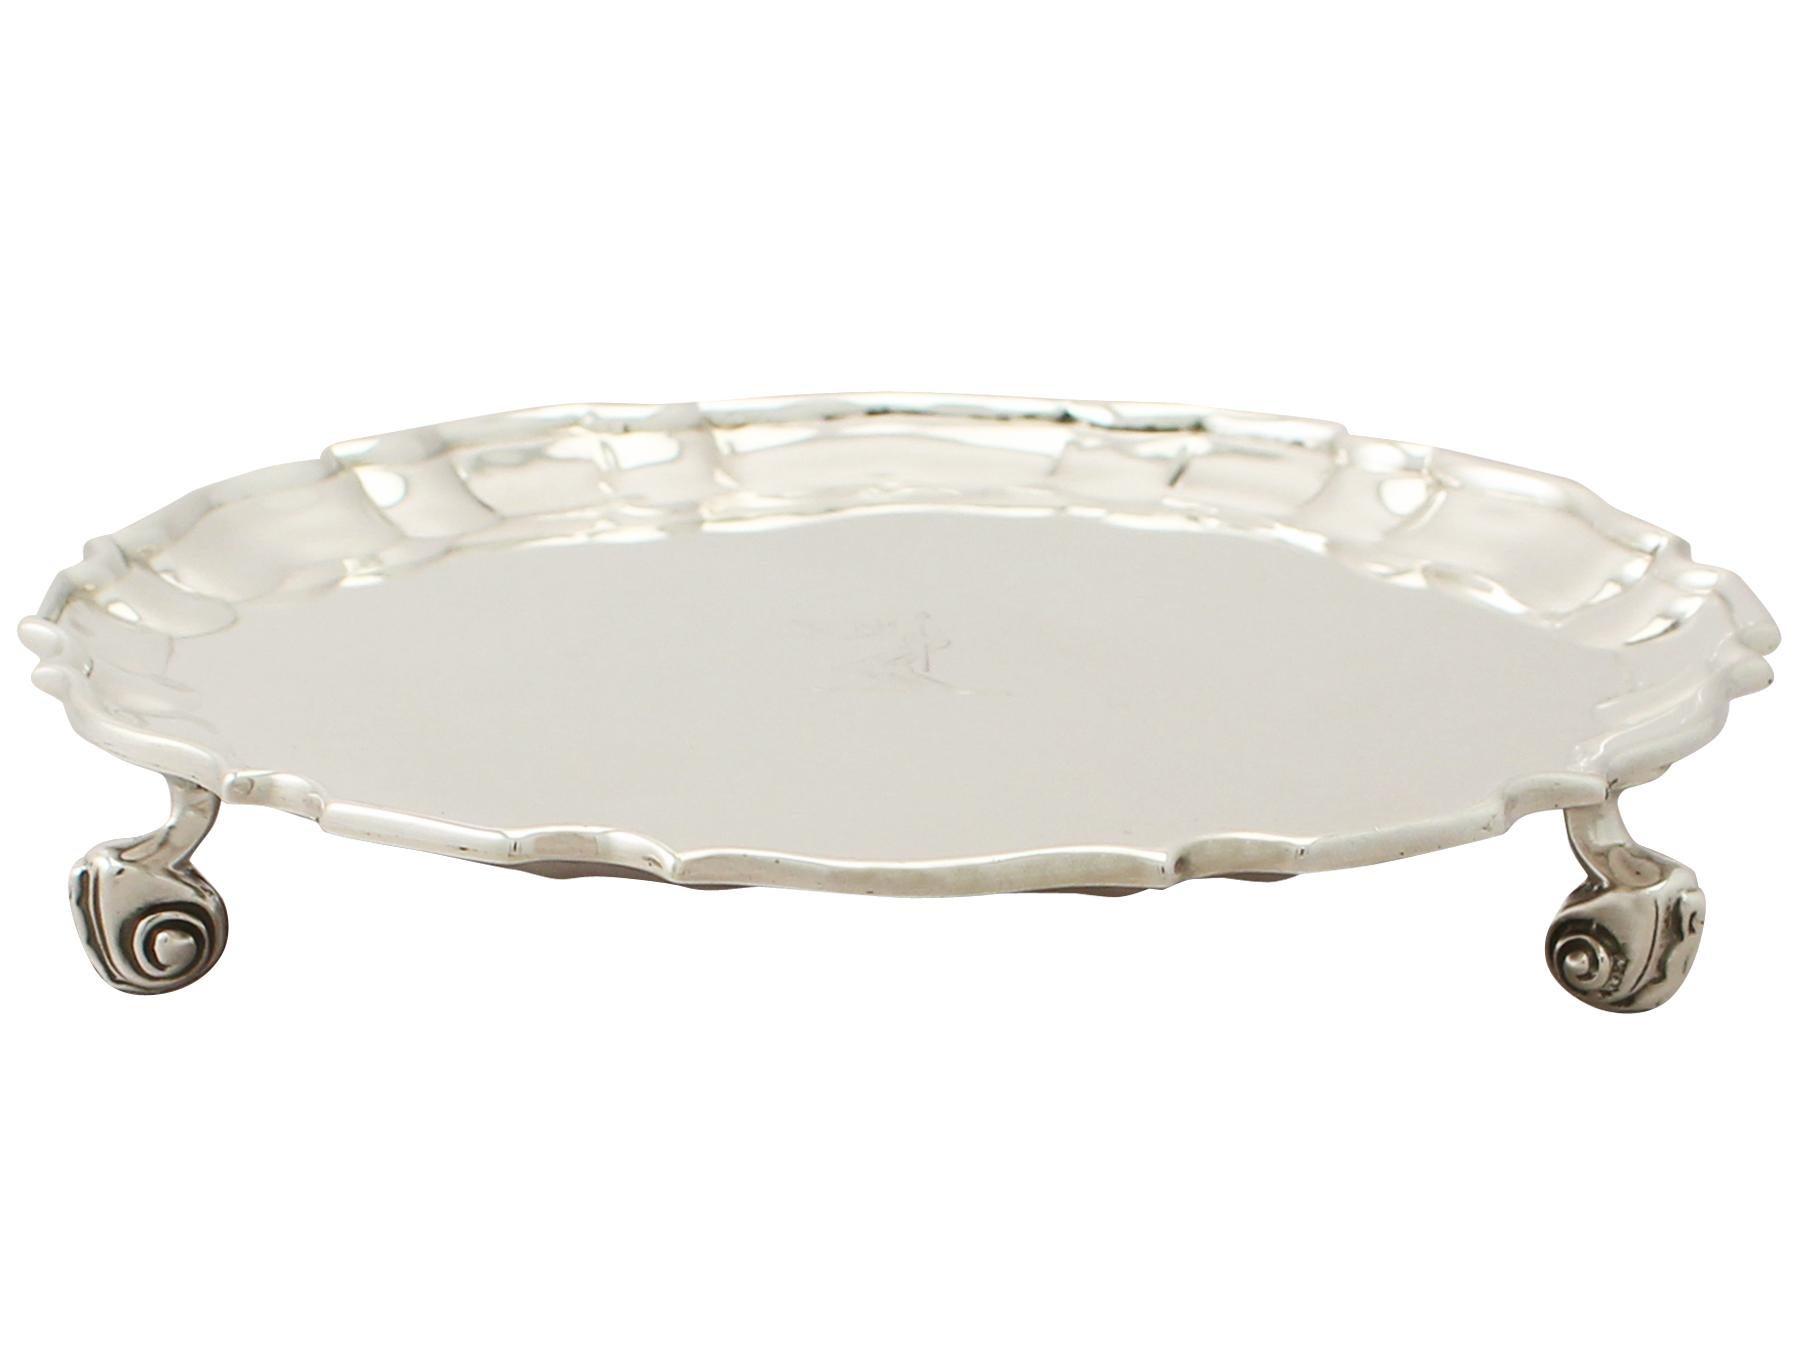 A fine and impressive antique Edwardian English sterling silver waiter; an addition to our Edwardian dining collection.

This fine antique Edwardian English sterling silver waiter has a plain circular shaped form.

The surface of fine example of